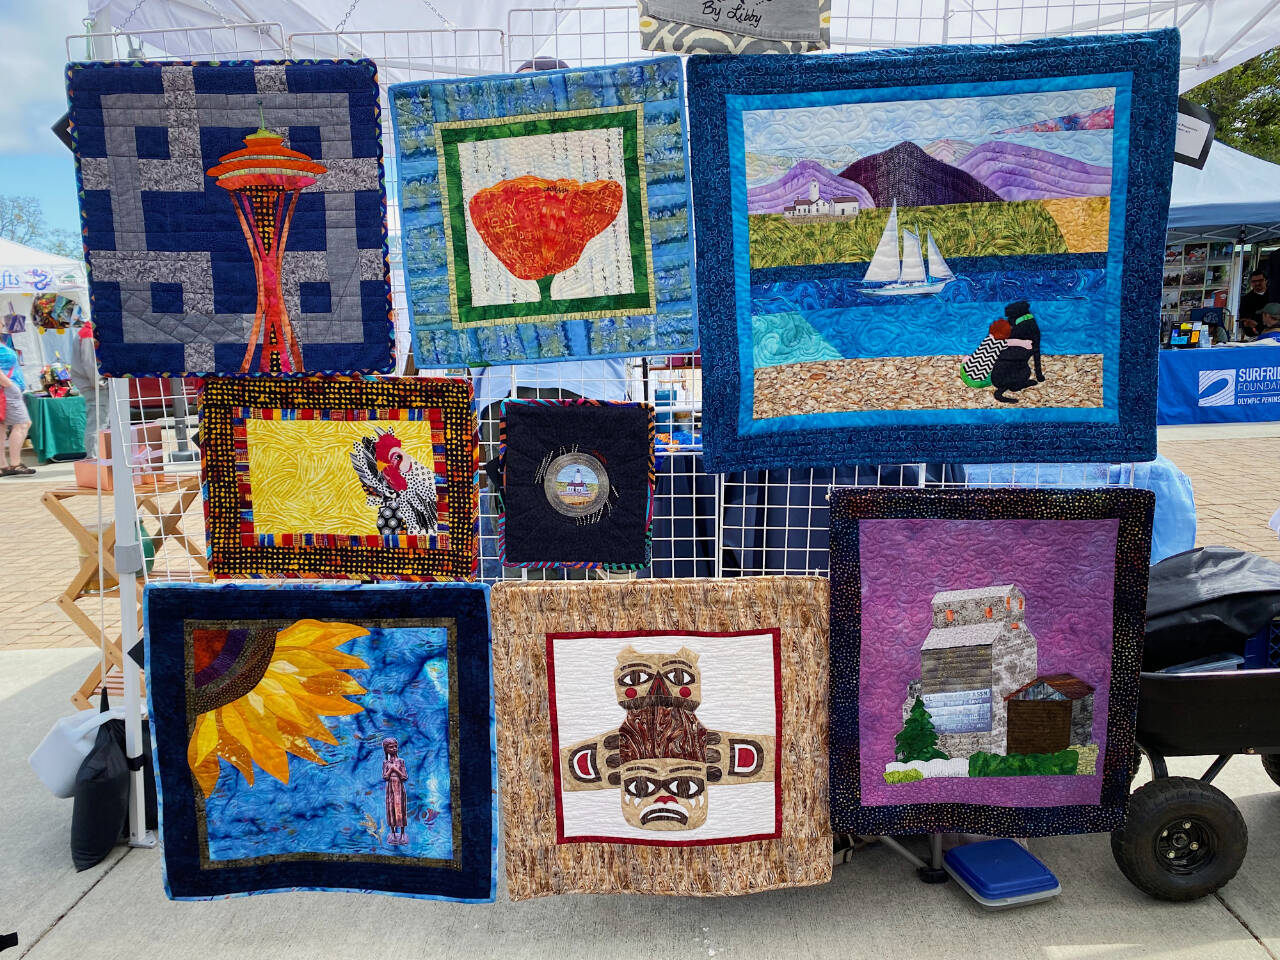 Photo by Emma Jane Garcia/Sequim Farmers & Artisans Market / Libby Ballard’s hand-crafted, upcycled, and environmentally friendly clothing, aprons, bags, fabric household essentials and art quilts are on display at the Sequim Farmers & Artisans Market.